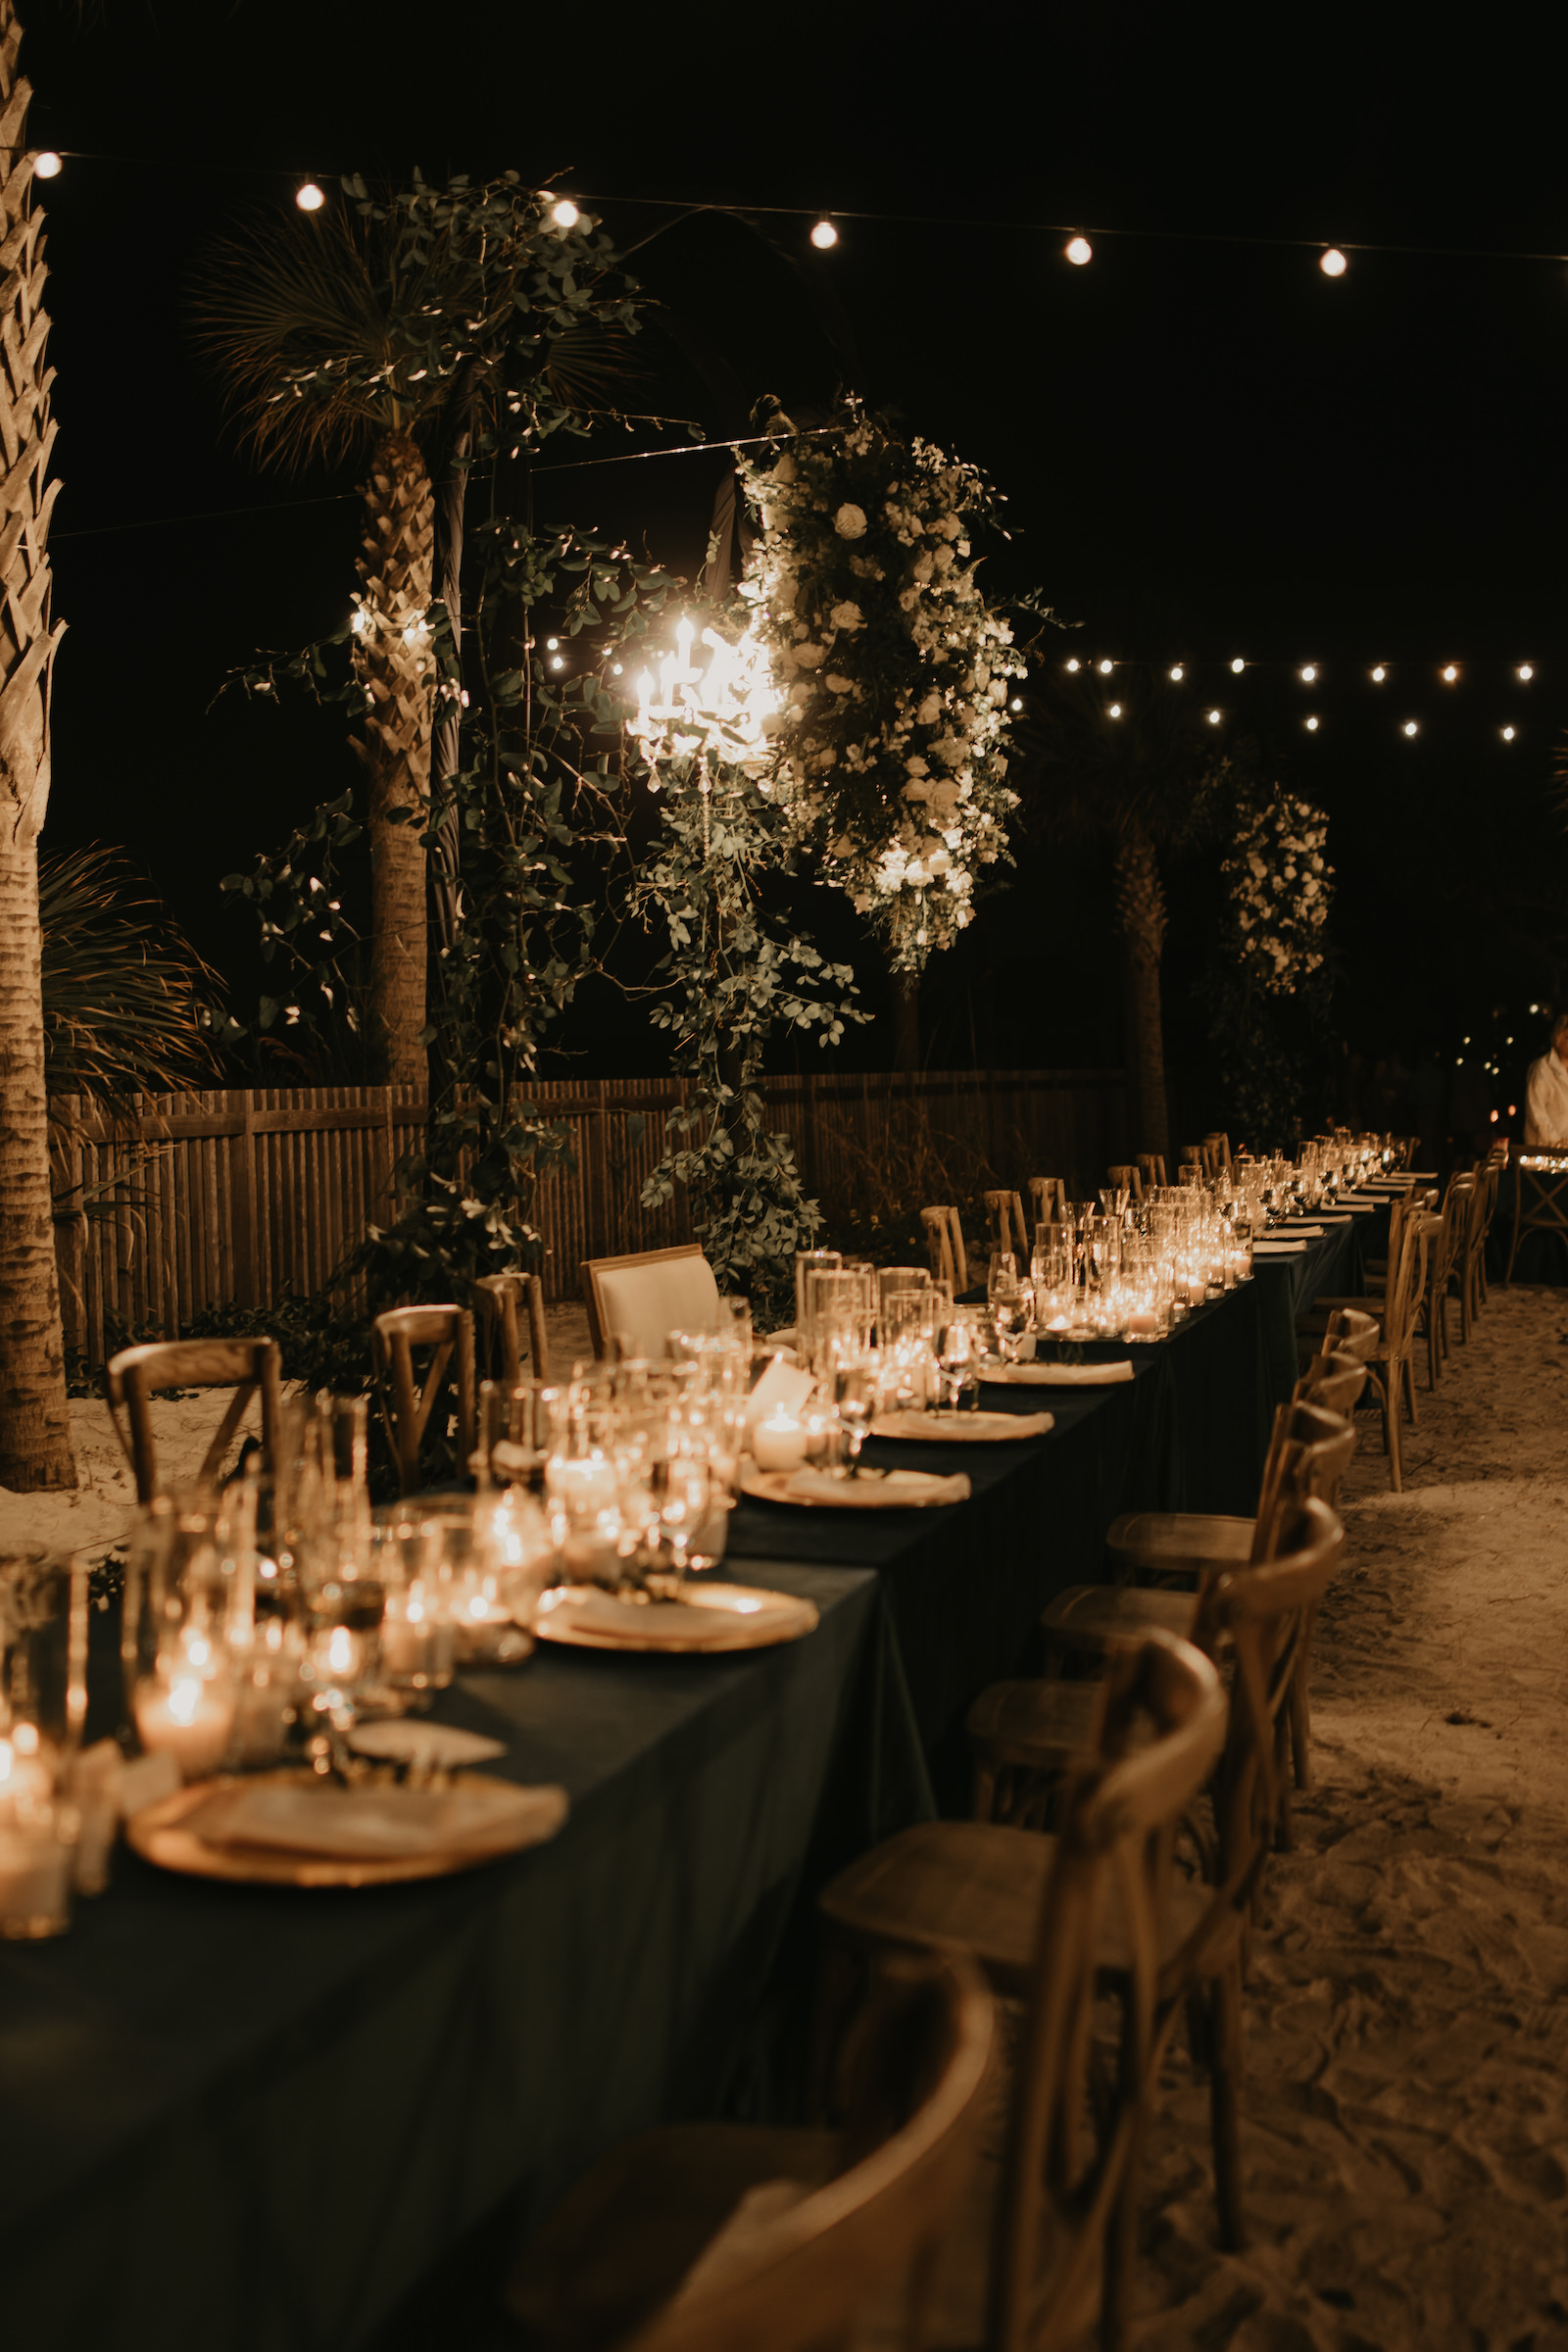 Whimsical Garden Beach with Long Feasting Tables and Candle Centerpieces | Outdoor Wedding Reception Ideas | Sarasota Lighting and Rental Company Gabro Event Services